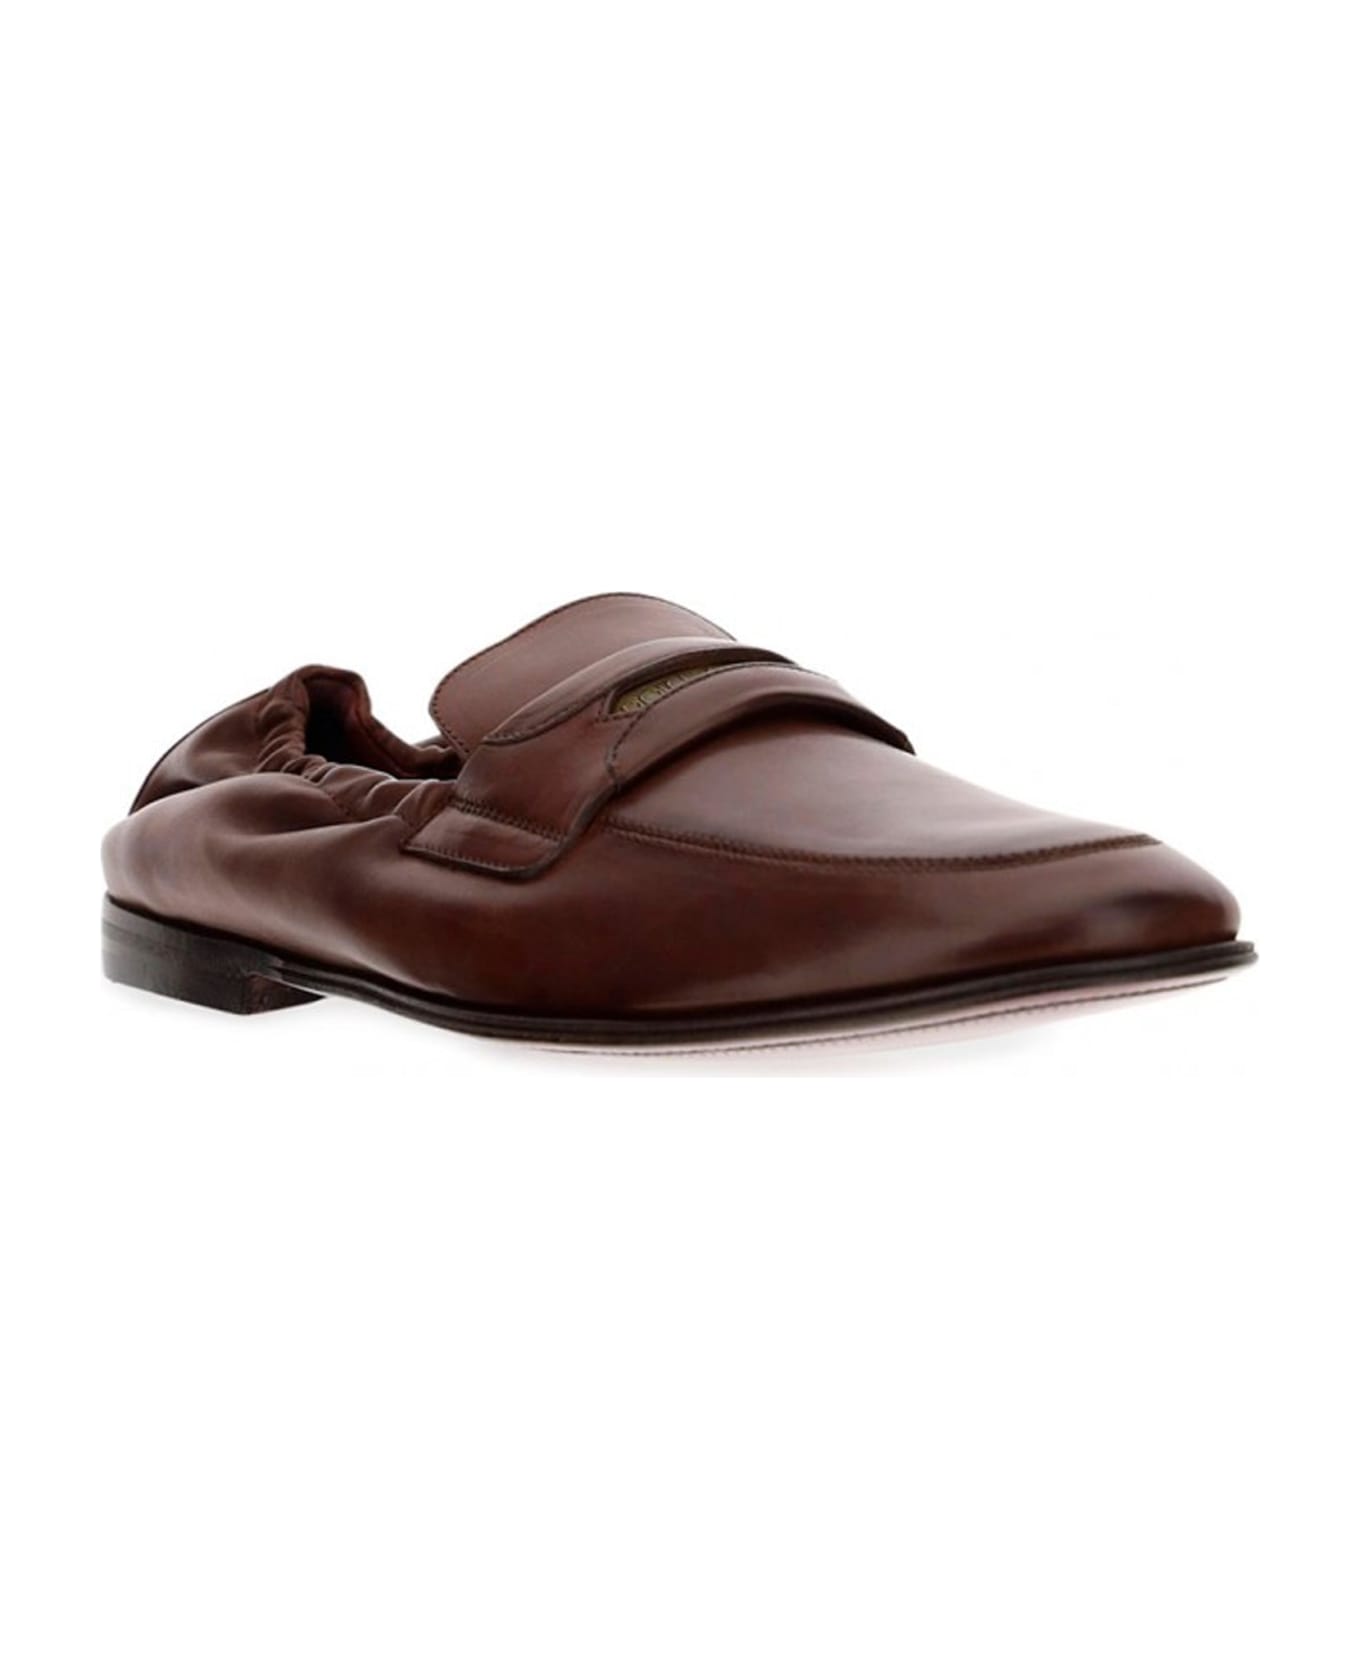 Dolce & Gabbana Leather Loafers - Brown